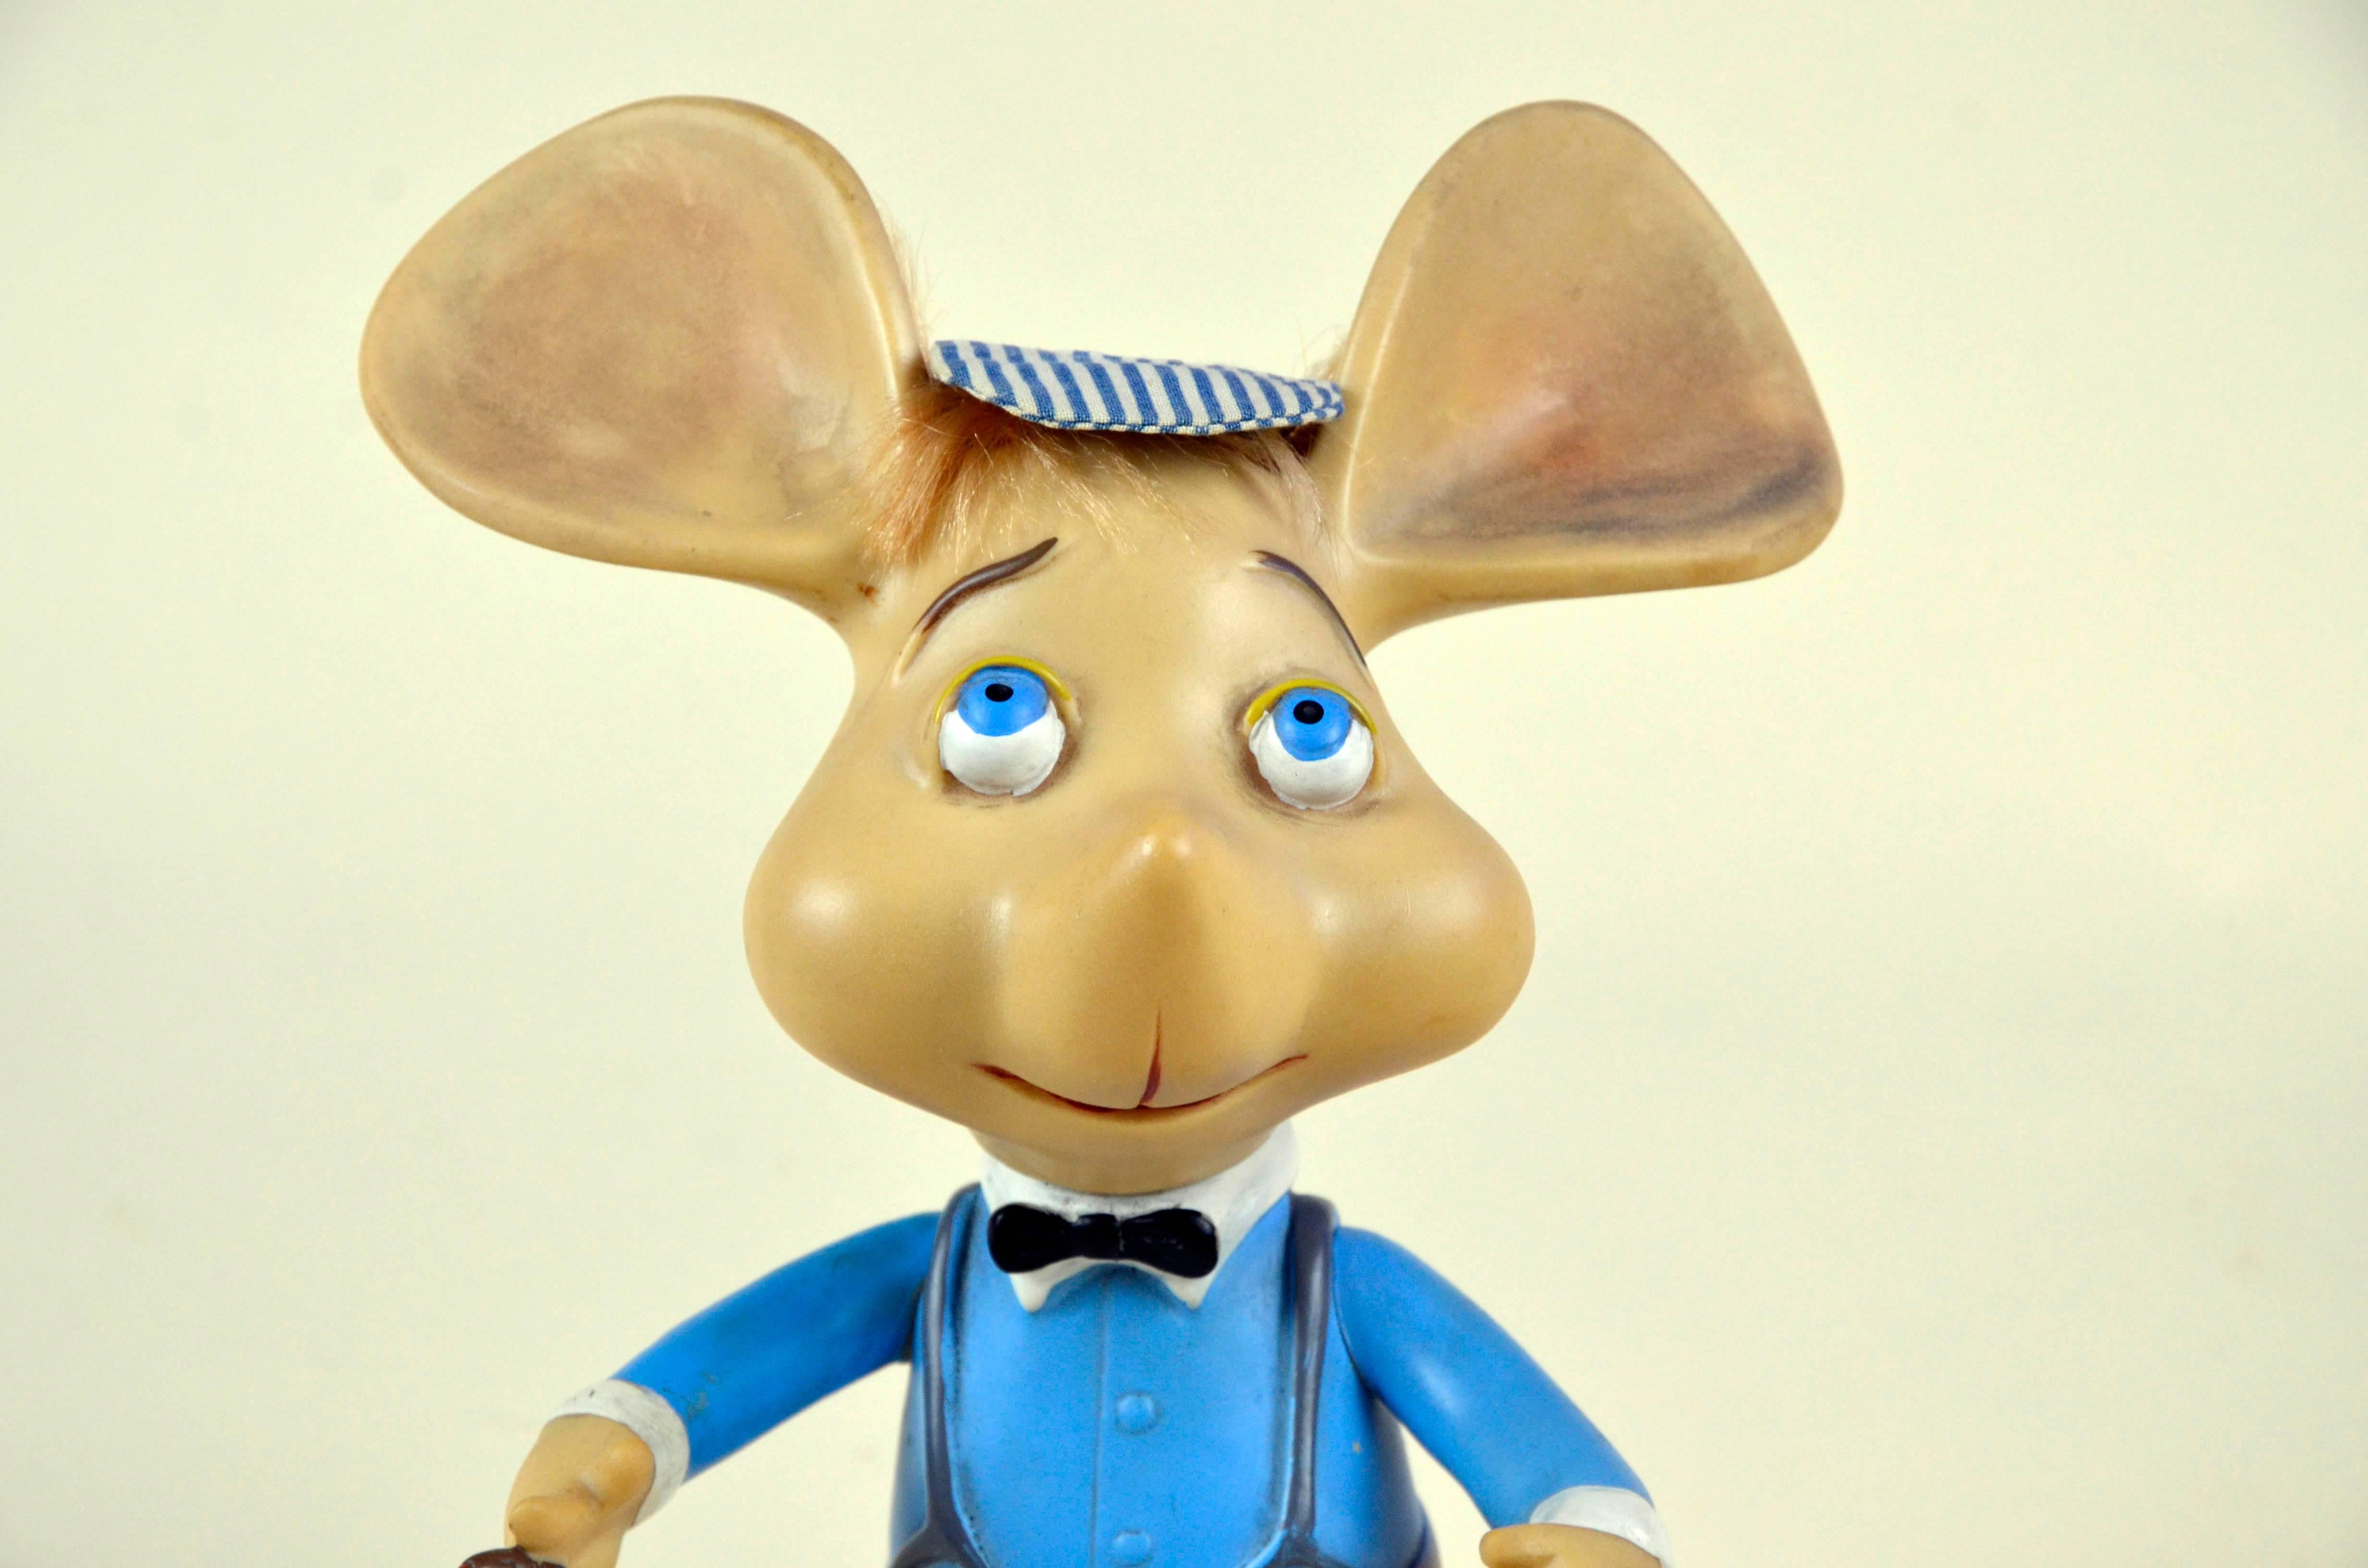 1960s iconic Topo Gigio mouse rubber toy made in Italy, designed by Maria Perego in 1958.

The toy has a fabric hat and movable arms.

Collector's note:

Topo Gigio Mouse was the lead character of a children's puppet show on Italian television in